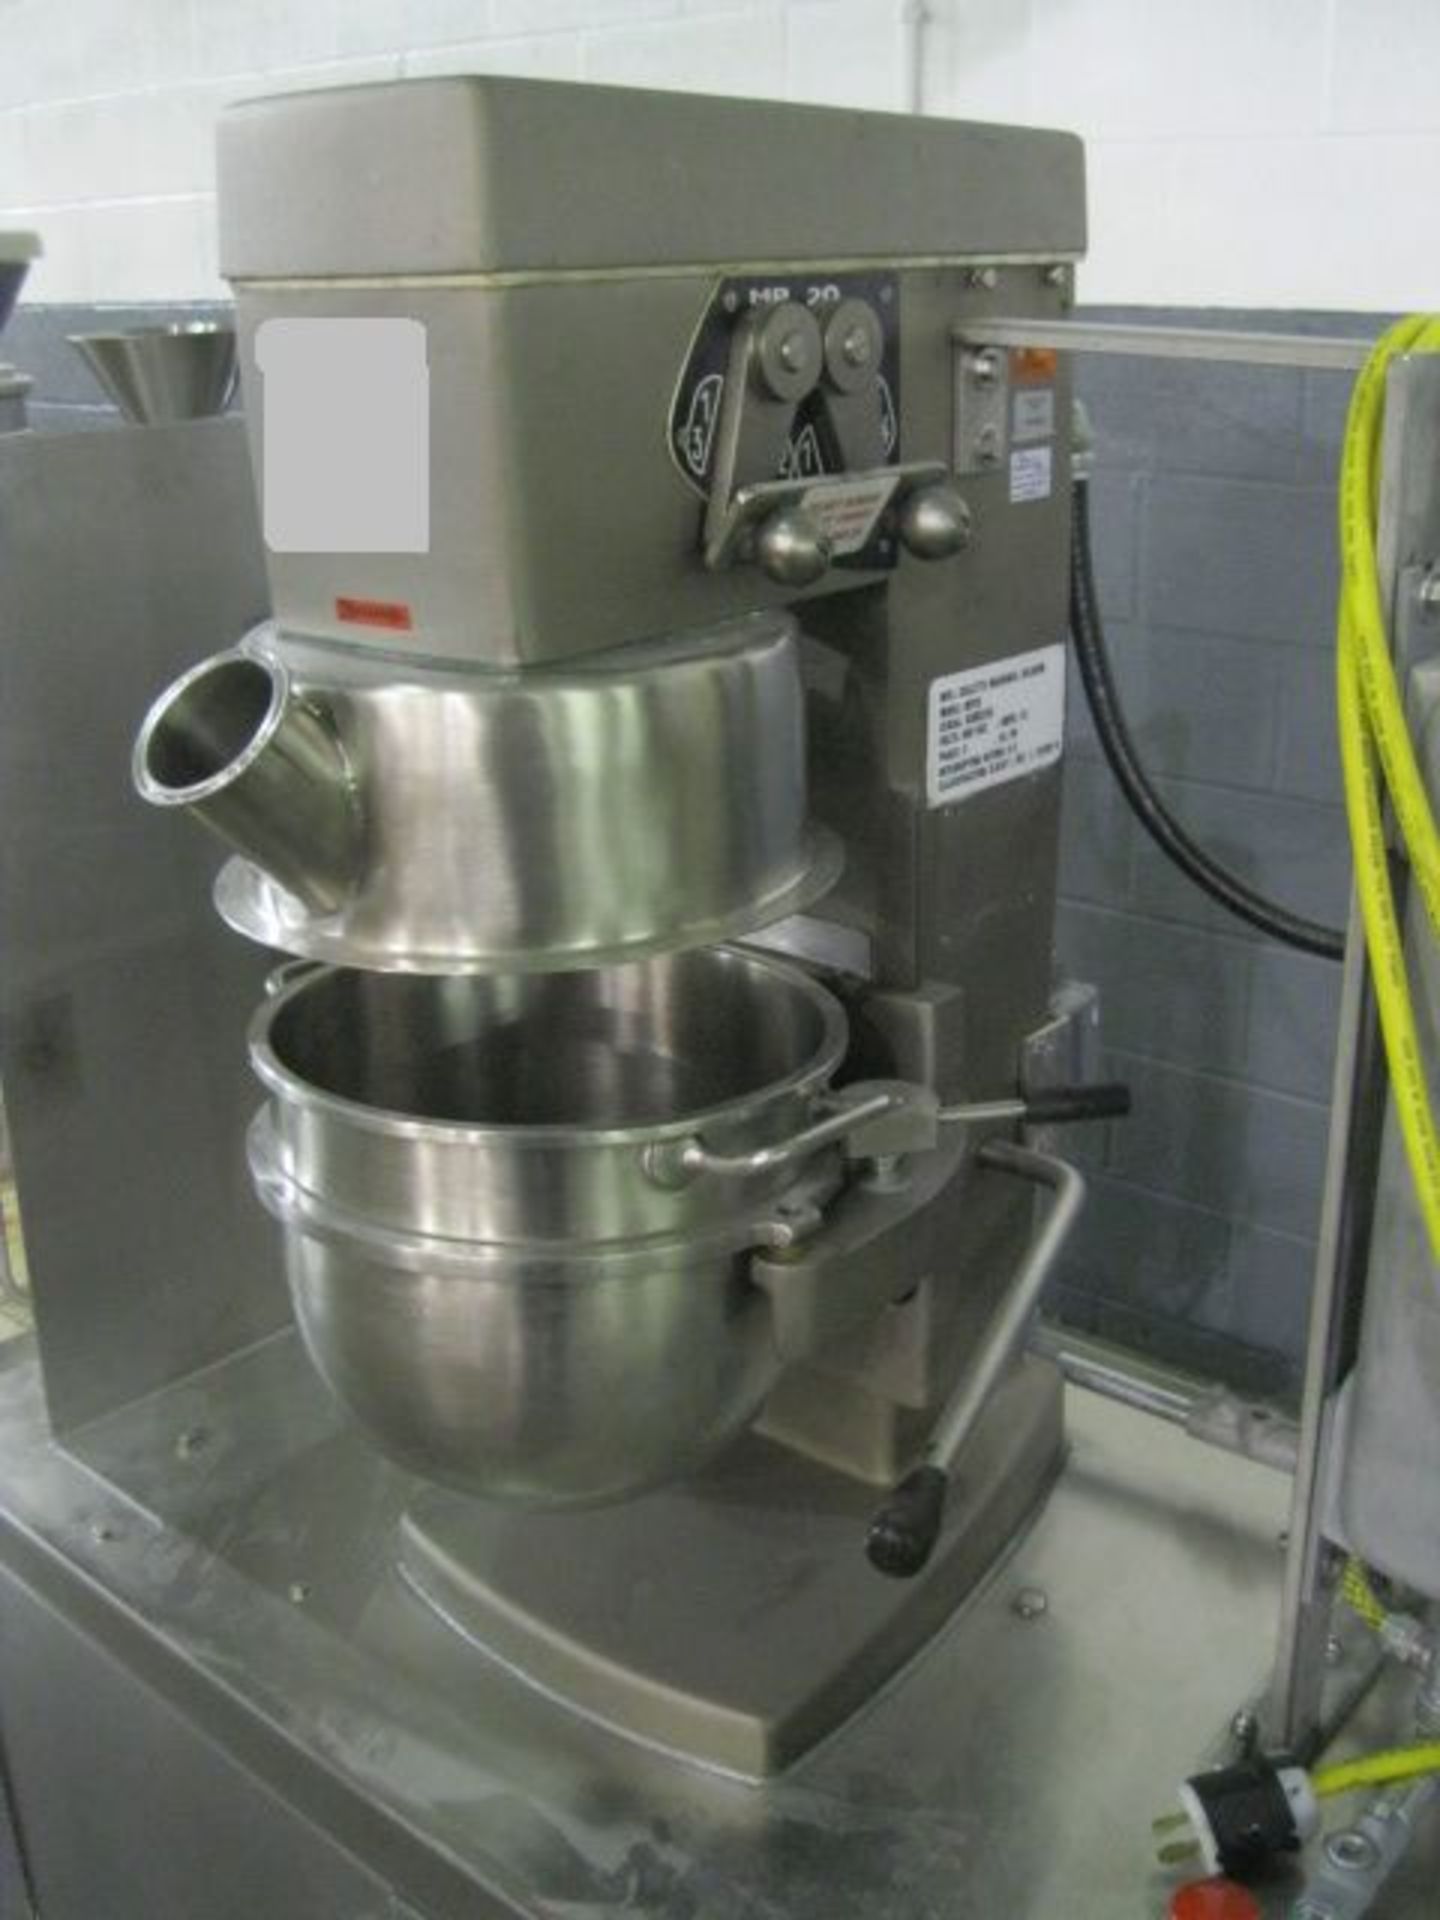 Collette planetary mixer, model MP 20, stainless steel bowl, beater and dust shroud, xp design, - Image 2 of 9